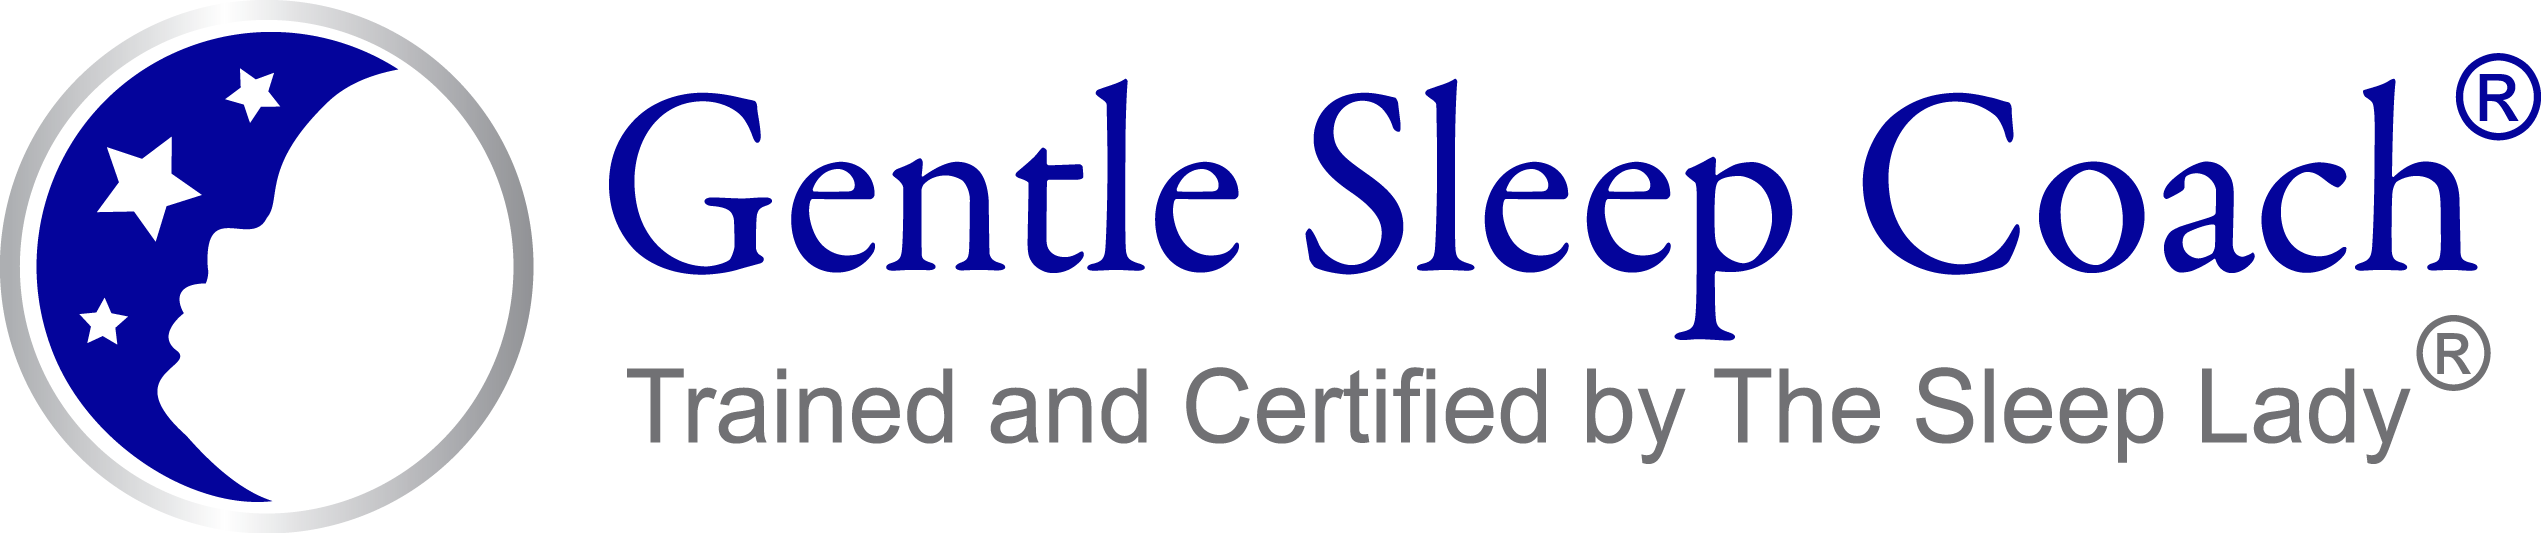 GSC logo png - When to start sleep training my baby?